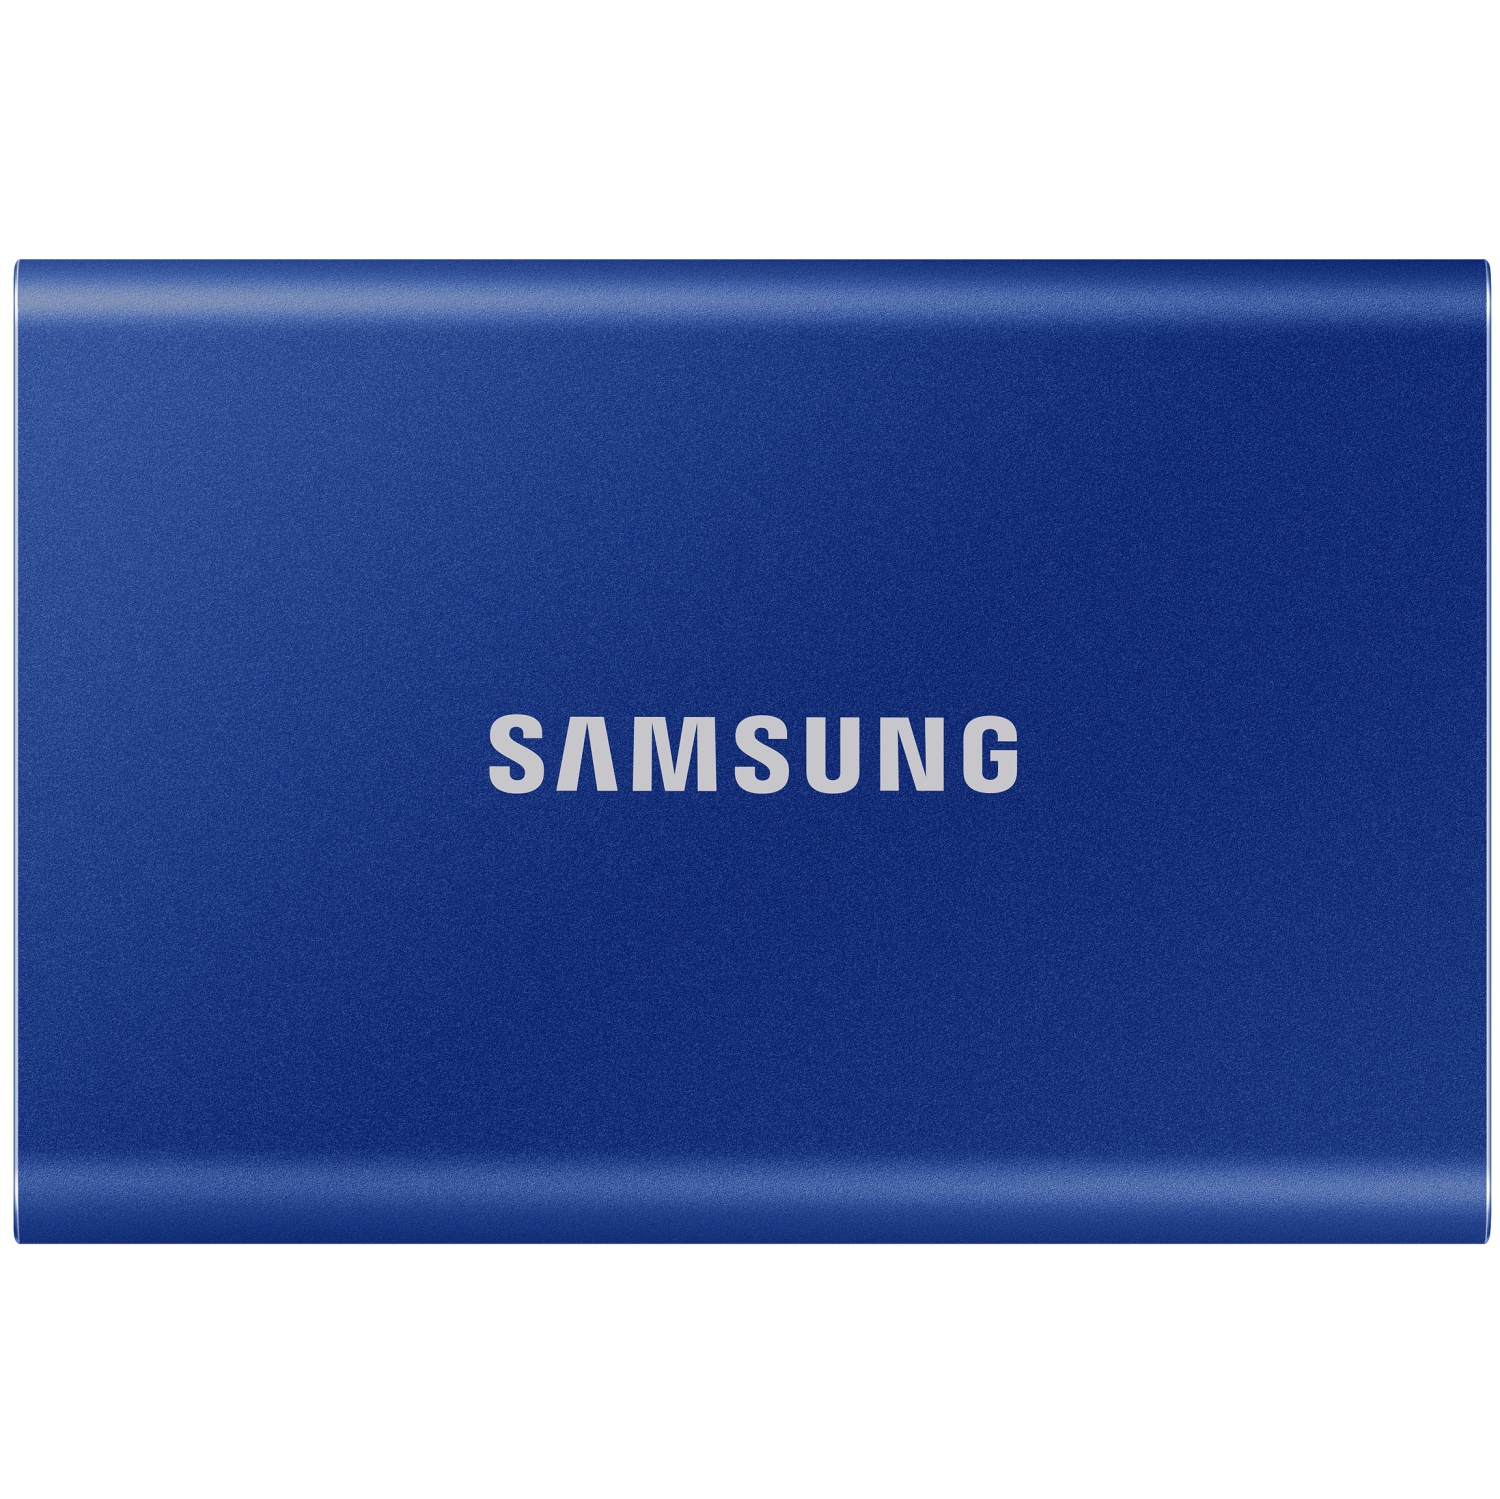 SAMSUNG T7 Portable SSD 500GB - Up to 1050 MB/s - USB 3.2 External Solid State Drive, Blue (MU-PC500H/AM)